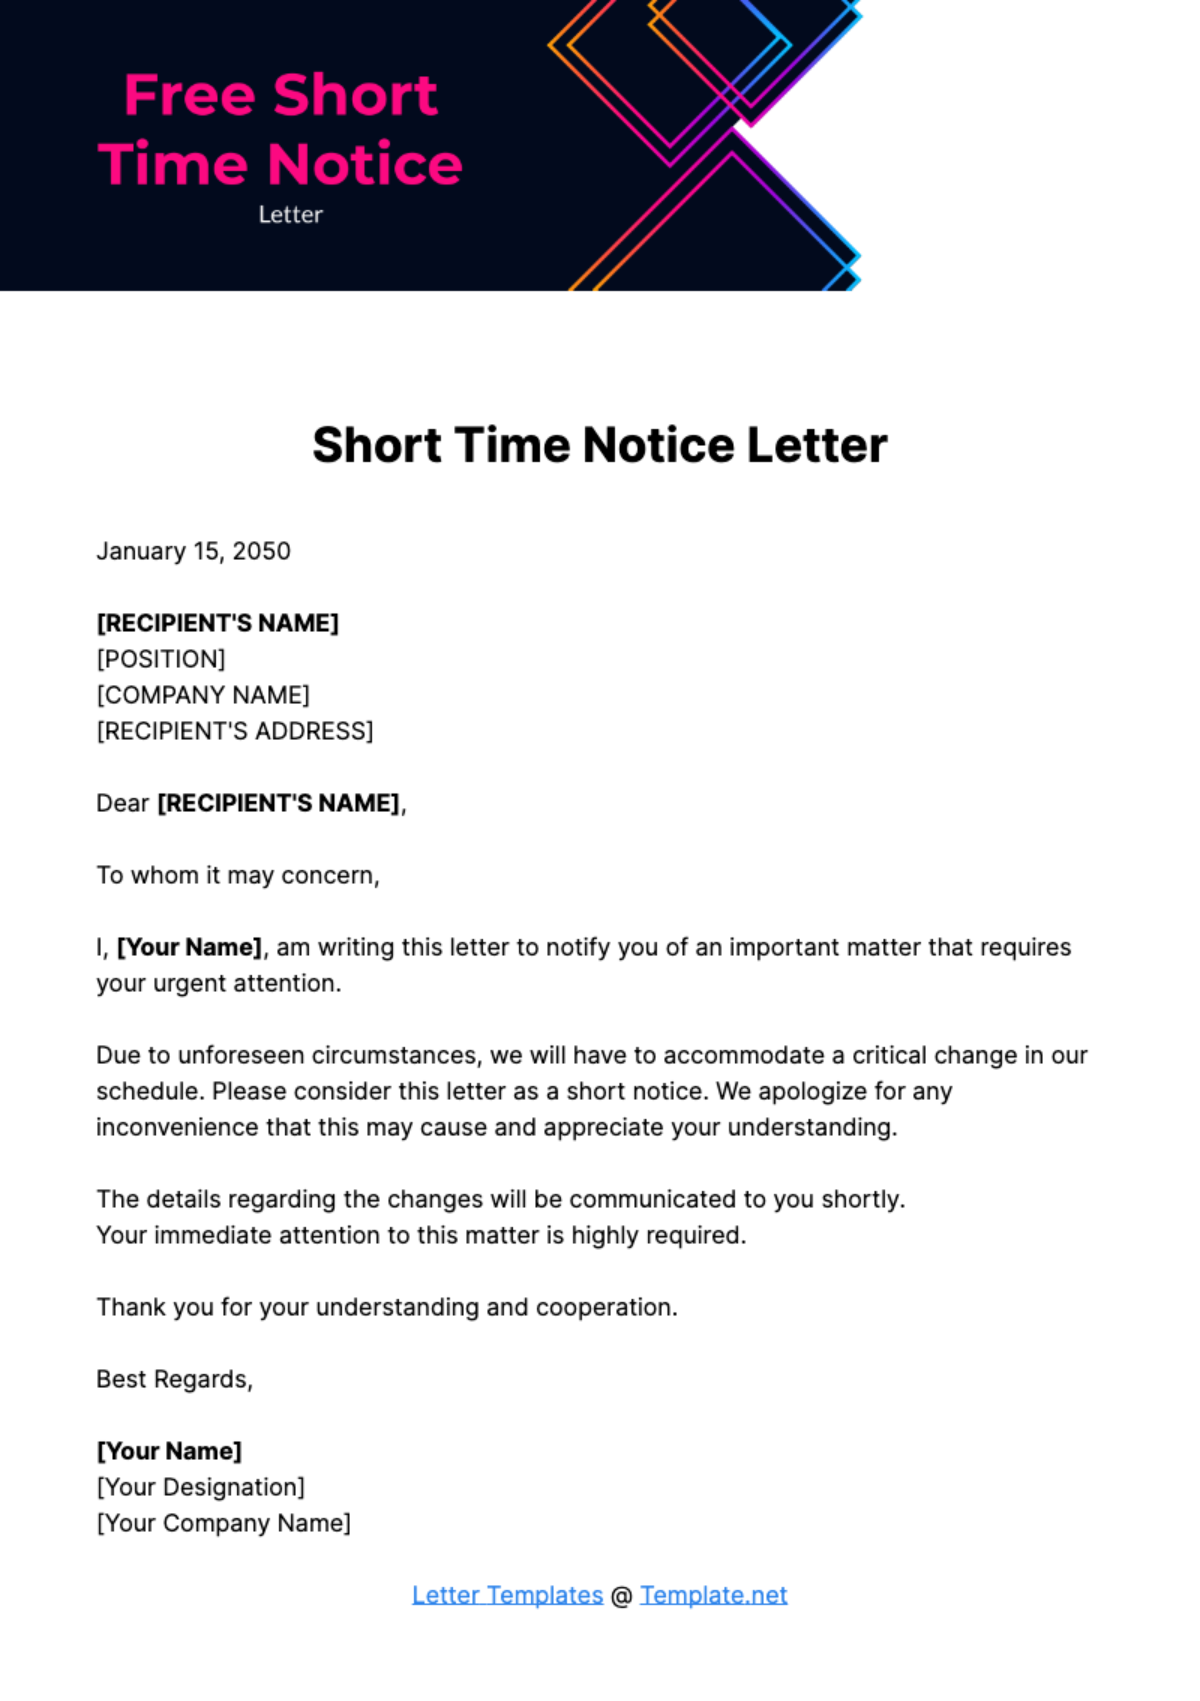 Free Short Time Notice Letter Template